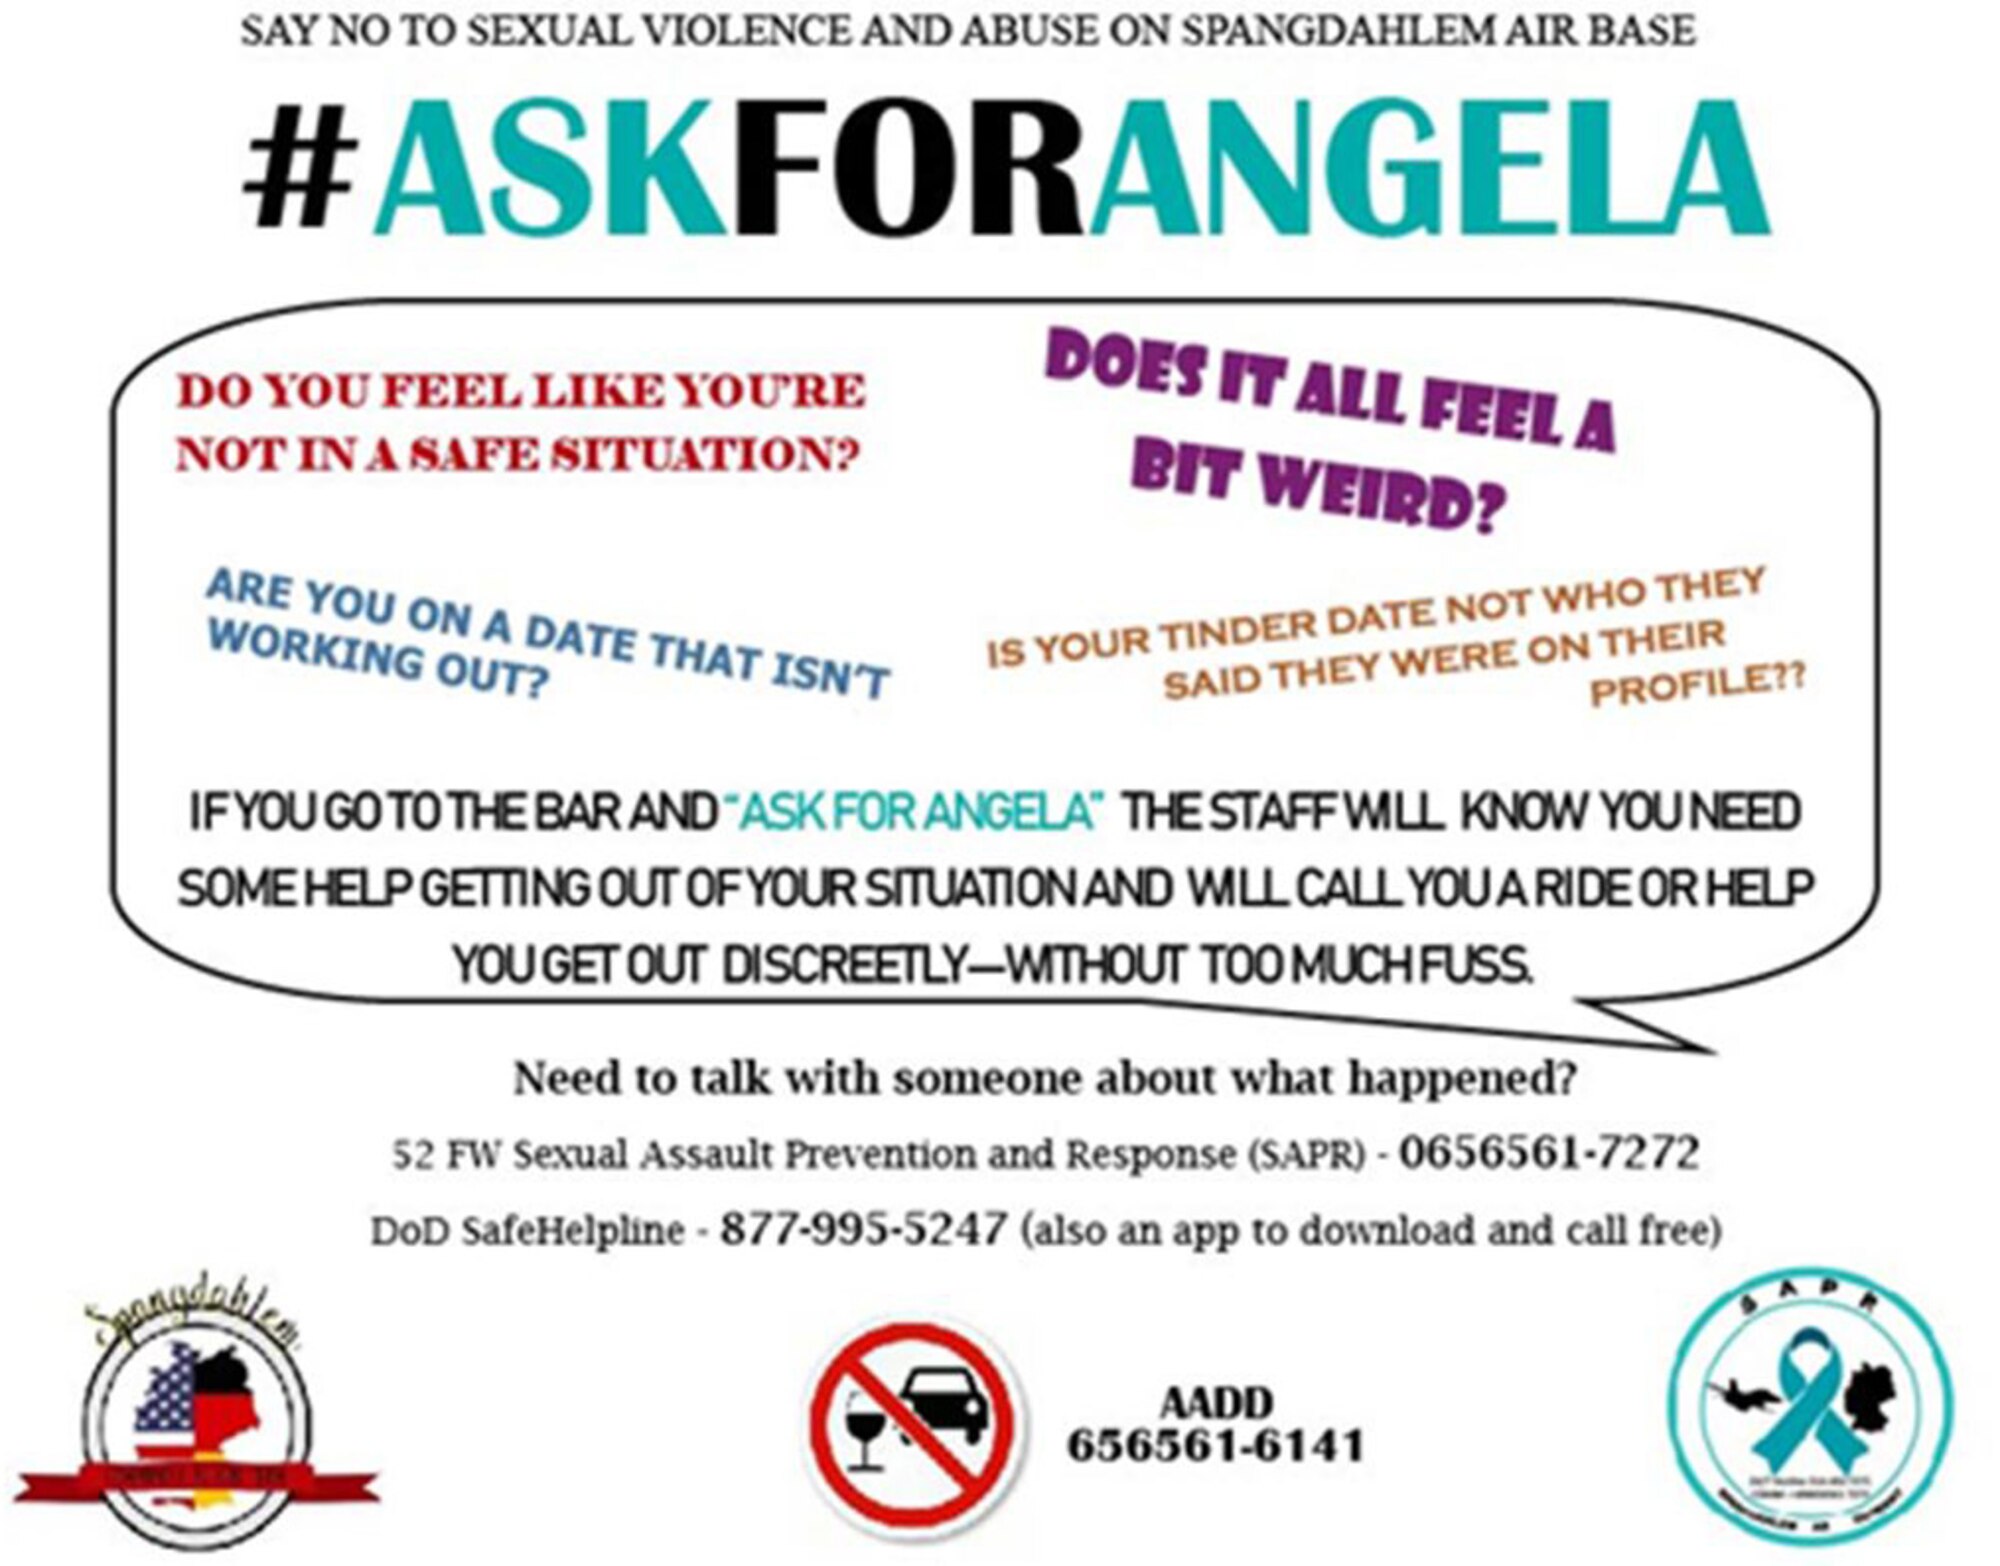 In December 2019, the 52nd Fighter Wing Sexual Assault Prevention and Response office, 52nd FW Force Support Squadron club, Airman Against Drunk Driving, and the Spangdahlem Action Team partnered together to start the “Ask For Angela” initiative on Spangdahlem Air Base, Germany.